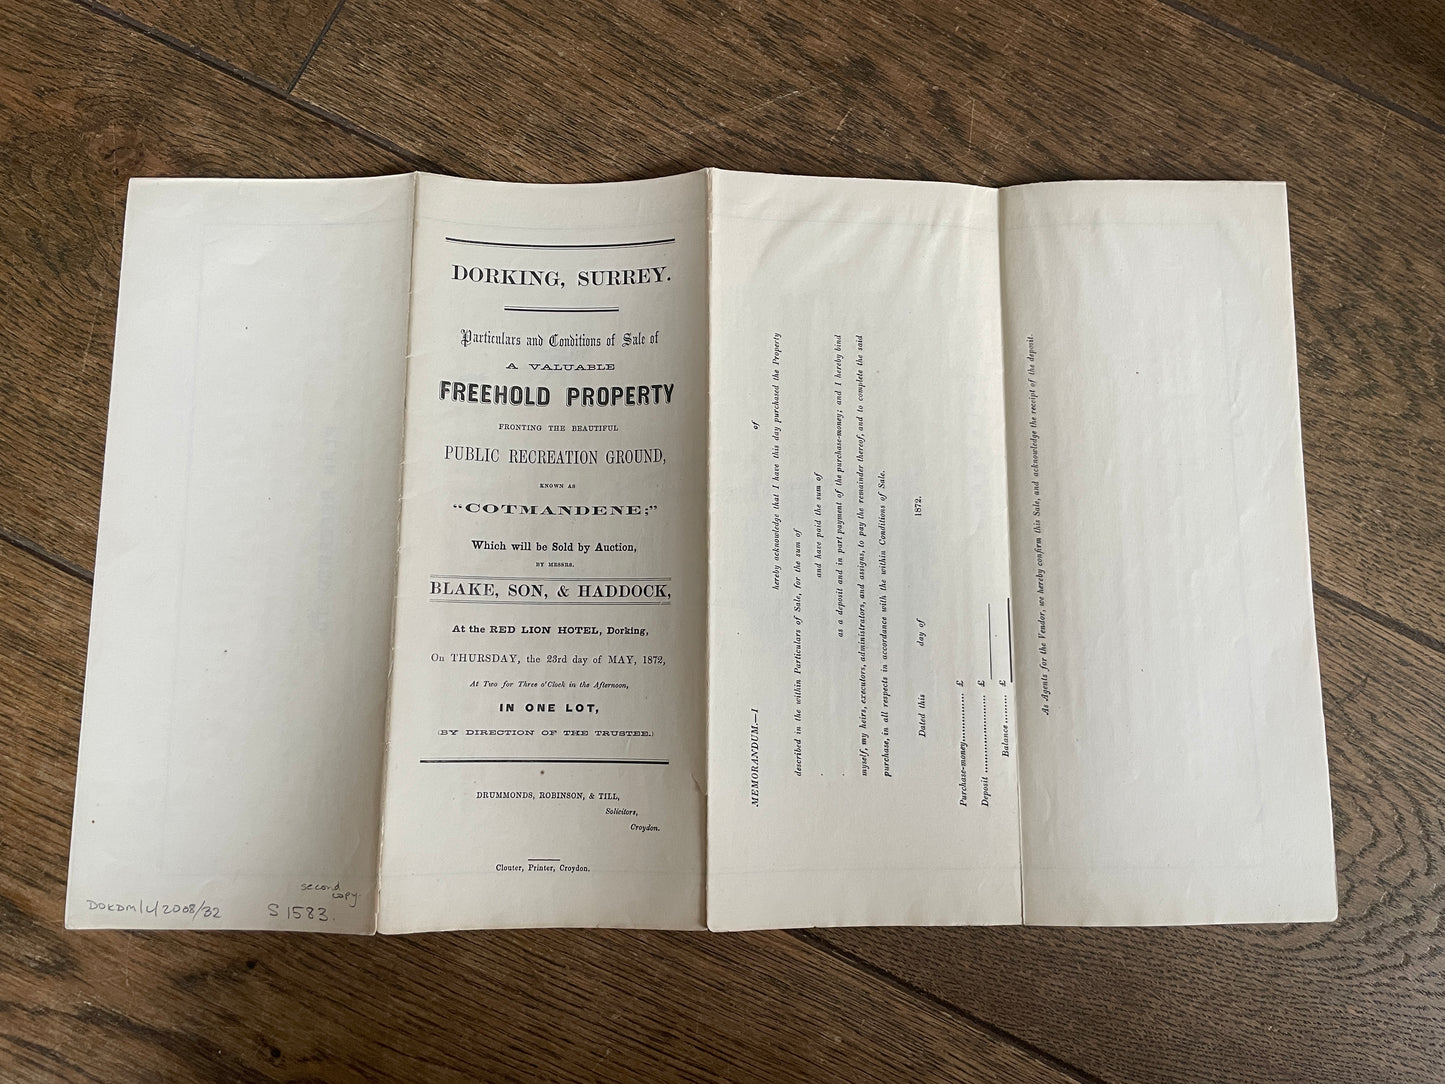 Two Freehold Properties on the Cotmandene, Dorking. 1872 Sales Particulars